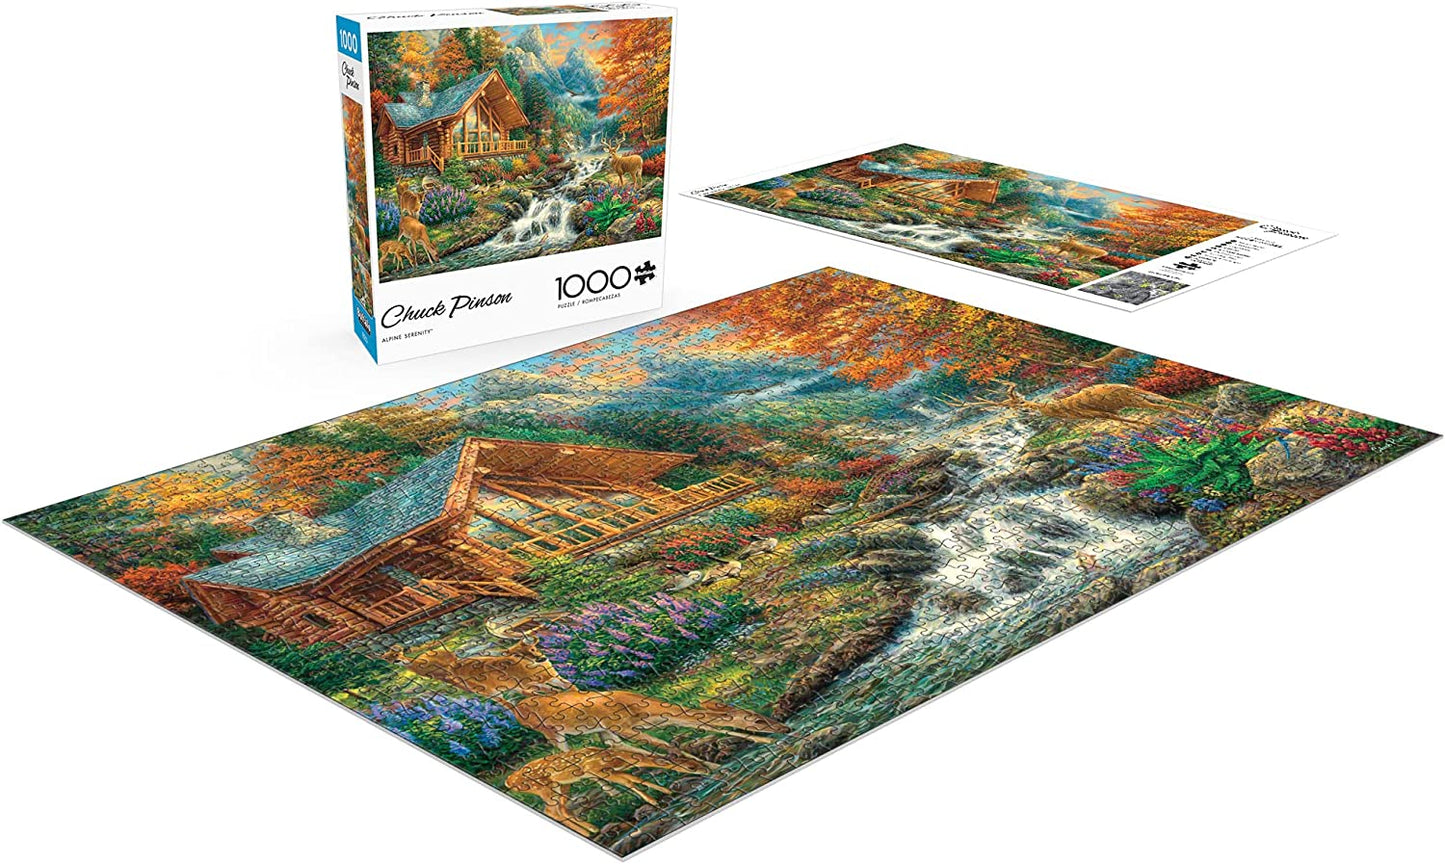 Alpine Serenity - 1000 Piece Jigsaw Puzzle with Hidden Images